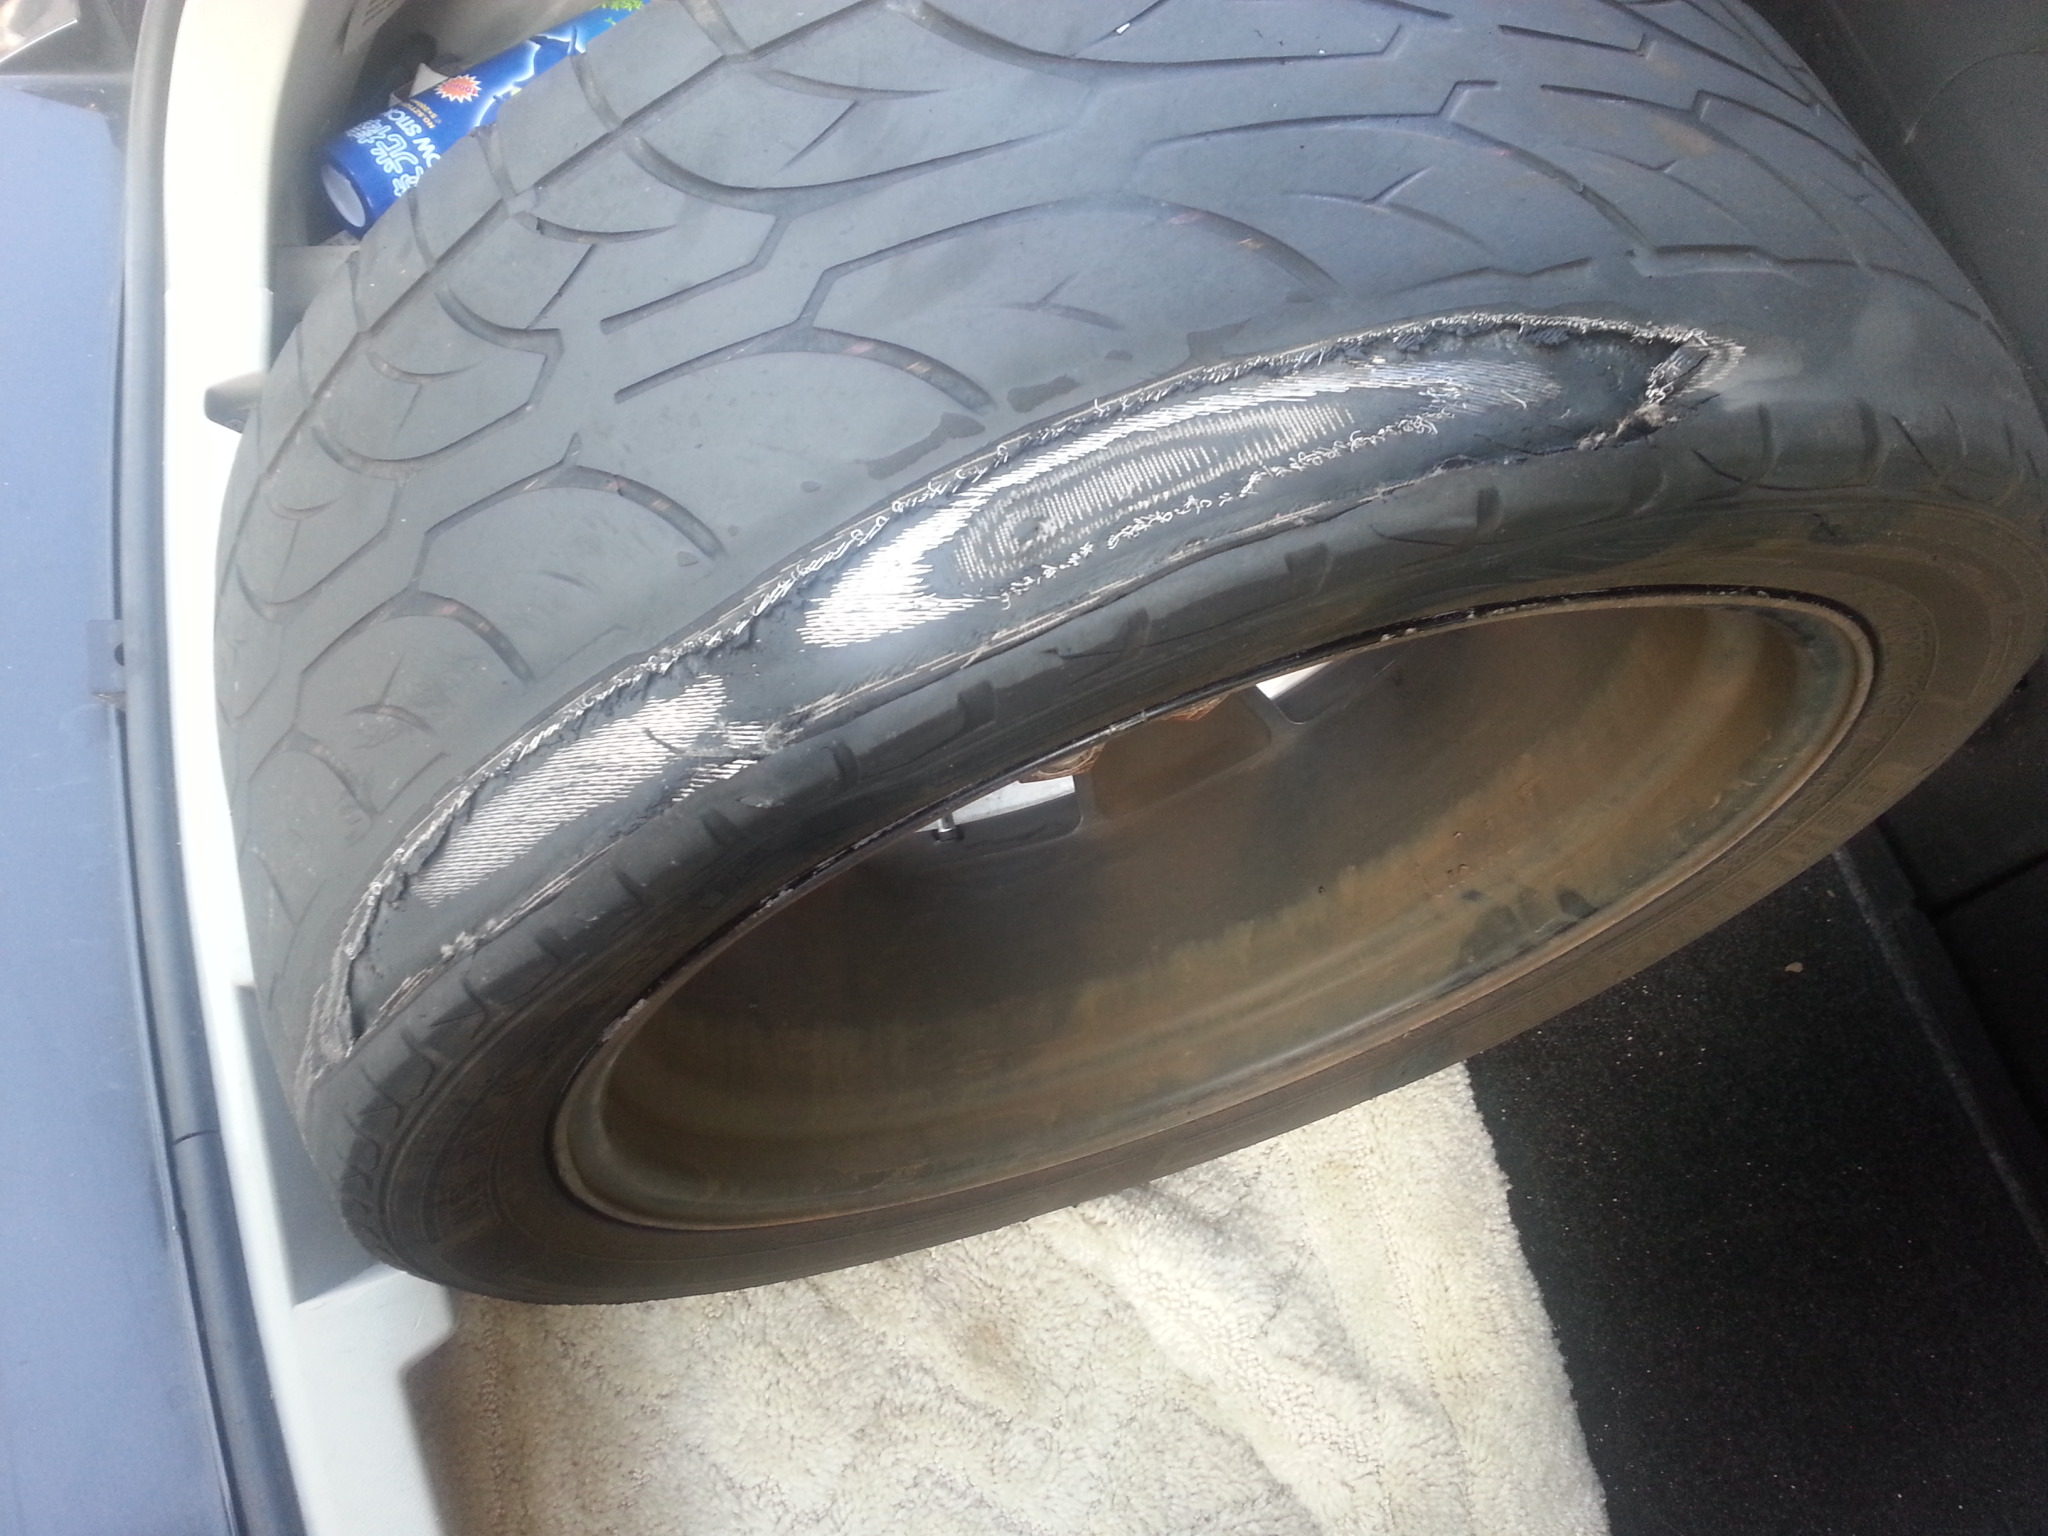 Here is the tire after I took it off and put it in my trunk to bring back to Sears and show them.